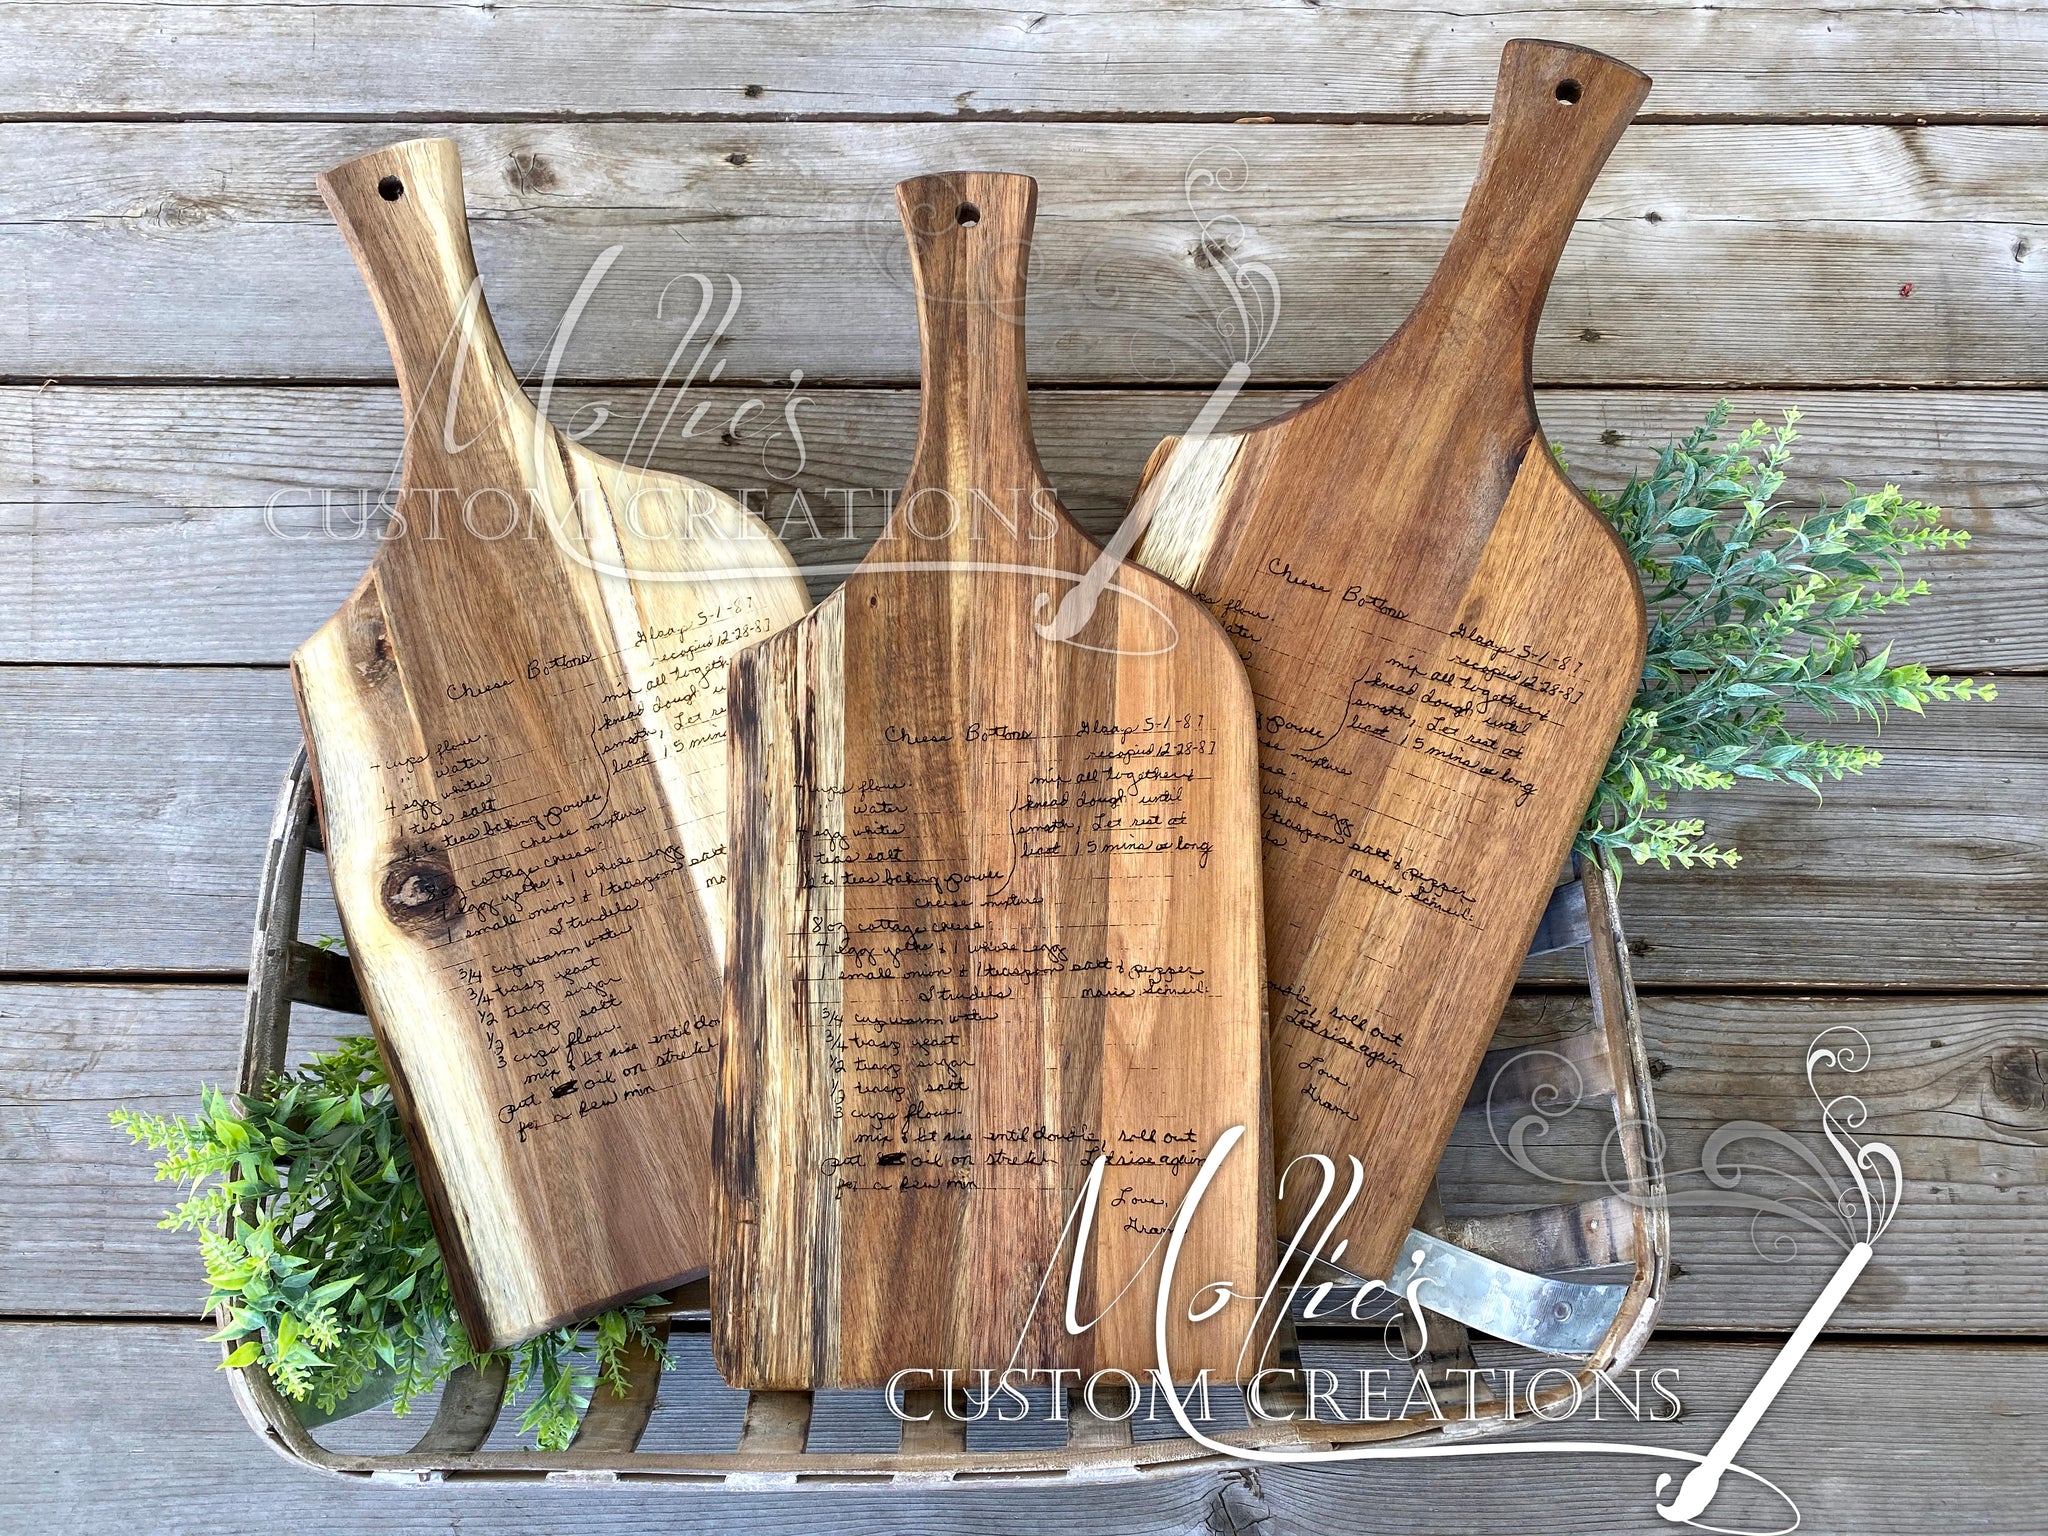 Recipe Cutting Board Handwritten, Gift for Sister, Mother, Grandmother,  Friend, Personalize Gift Under 50, Family Gift, Memorial 